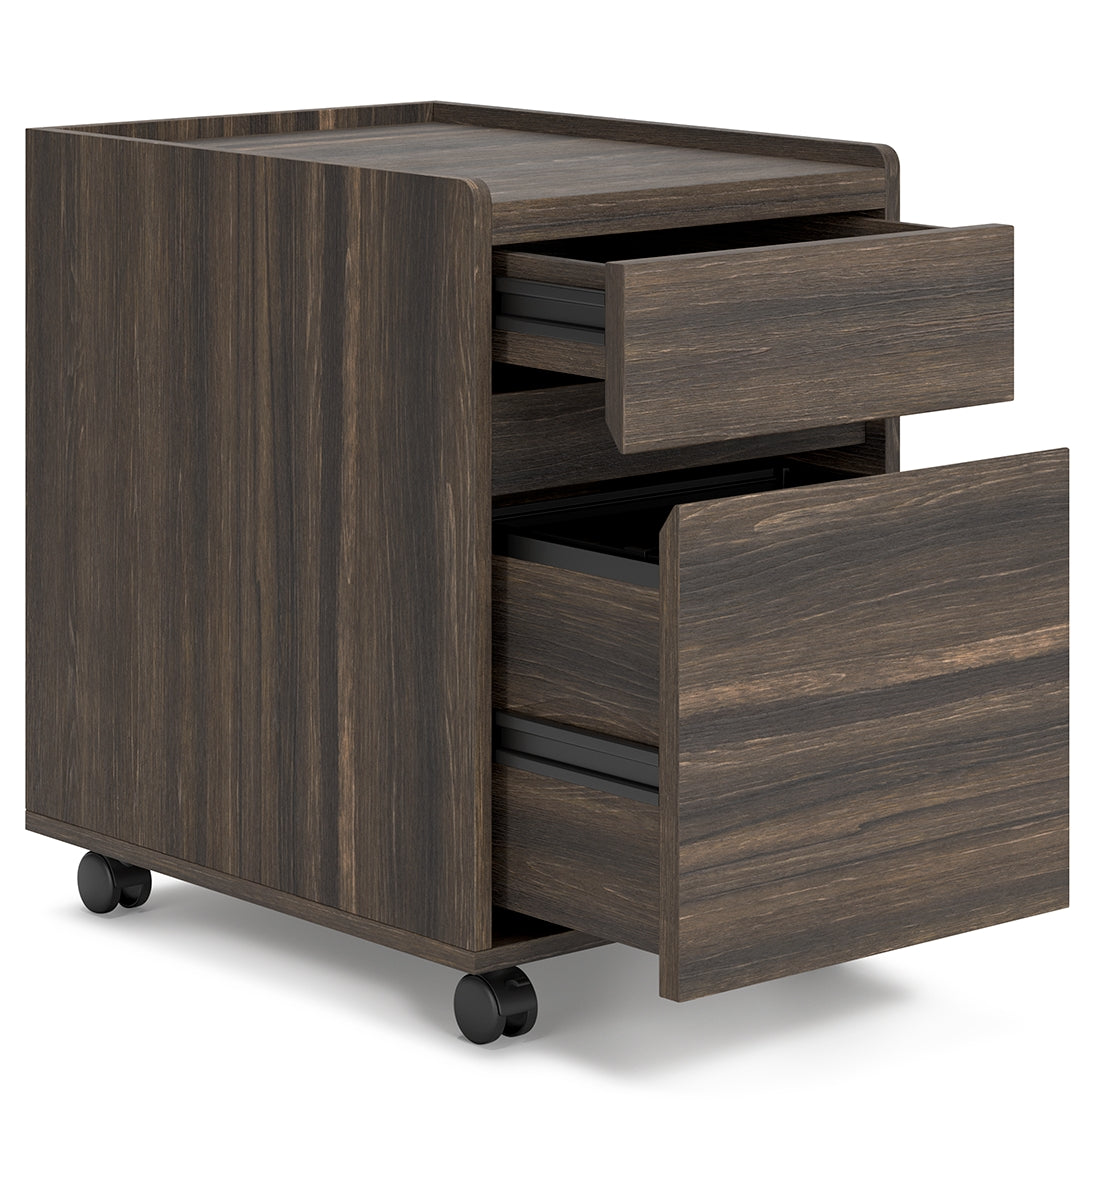 Zendex Home Office Desk and Storage